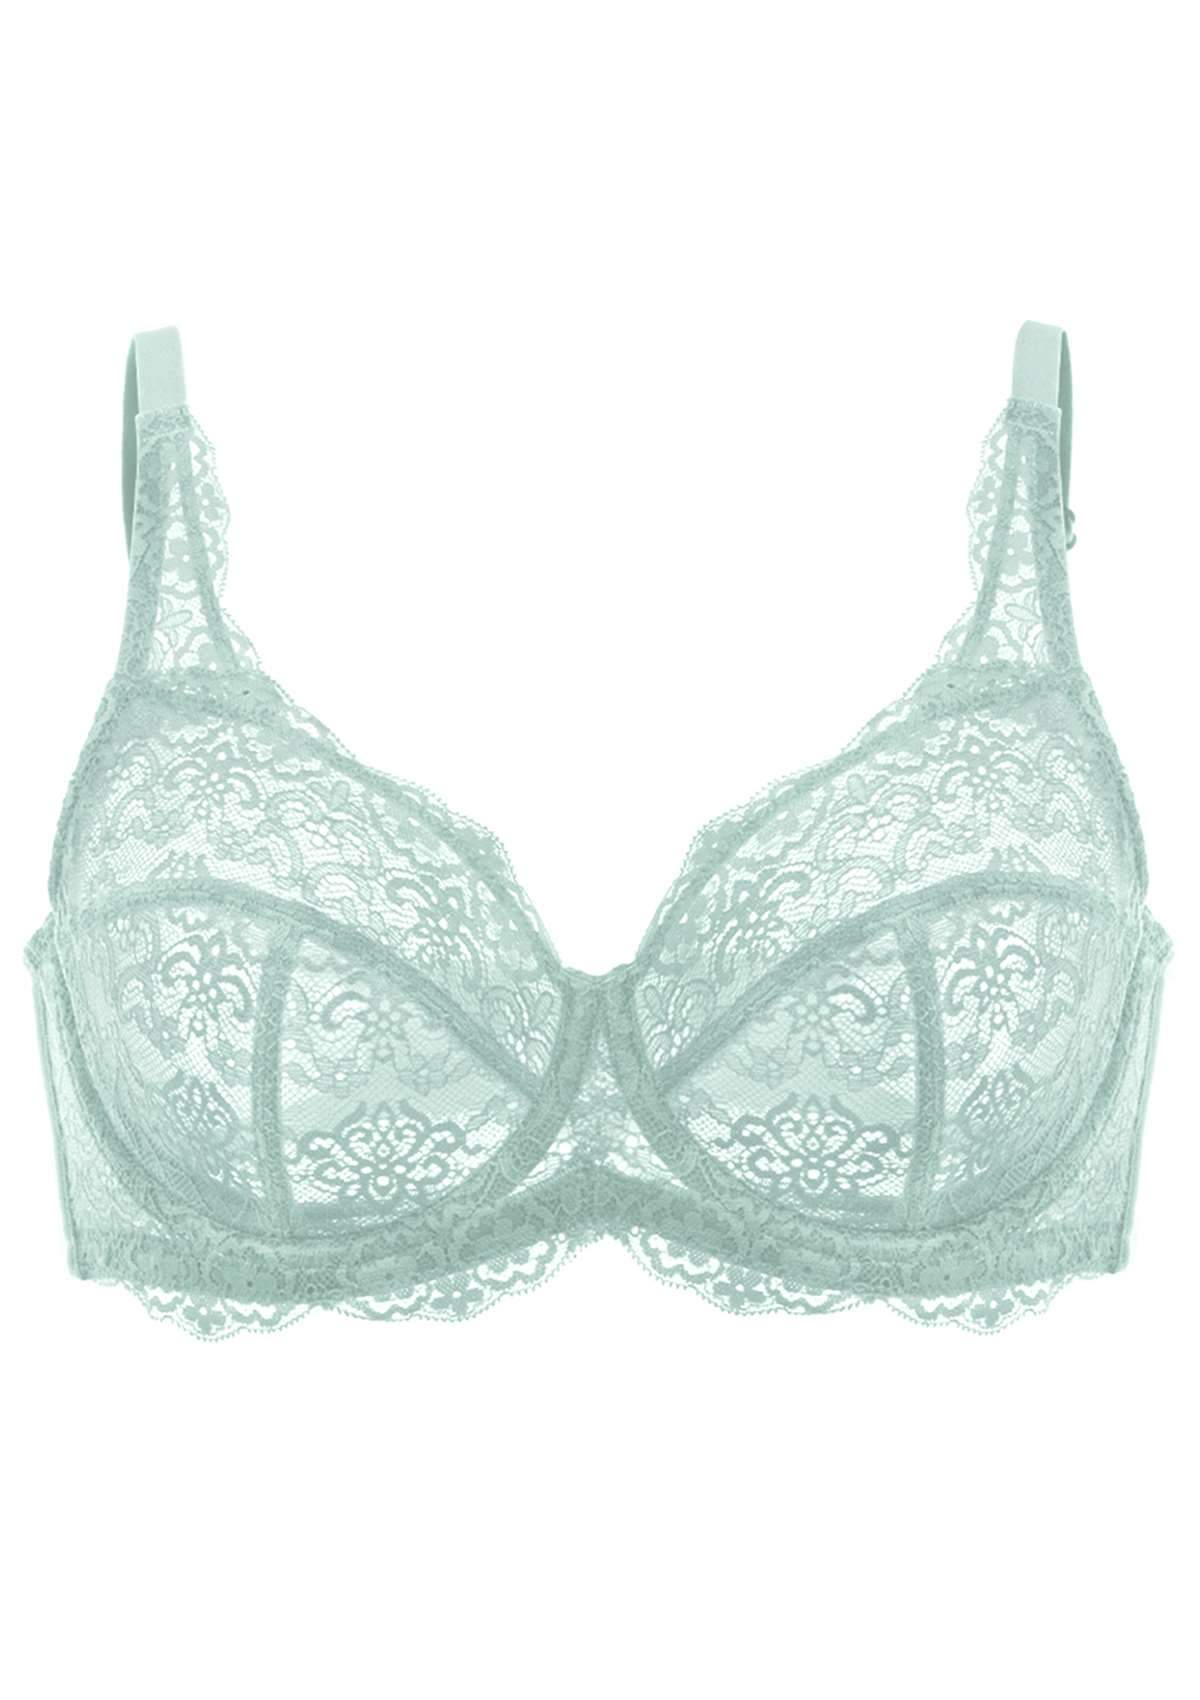 HSIA All-Over Floral Lace: Best Bra For Elderly With Sagging Breasts - Pewter Blue / 34 / DDD/F